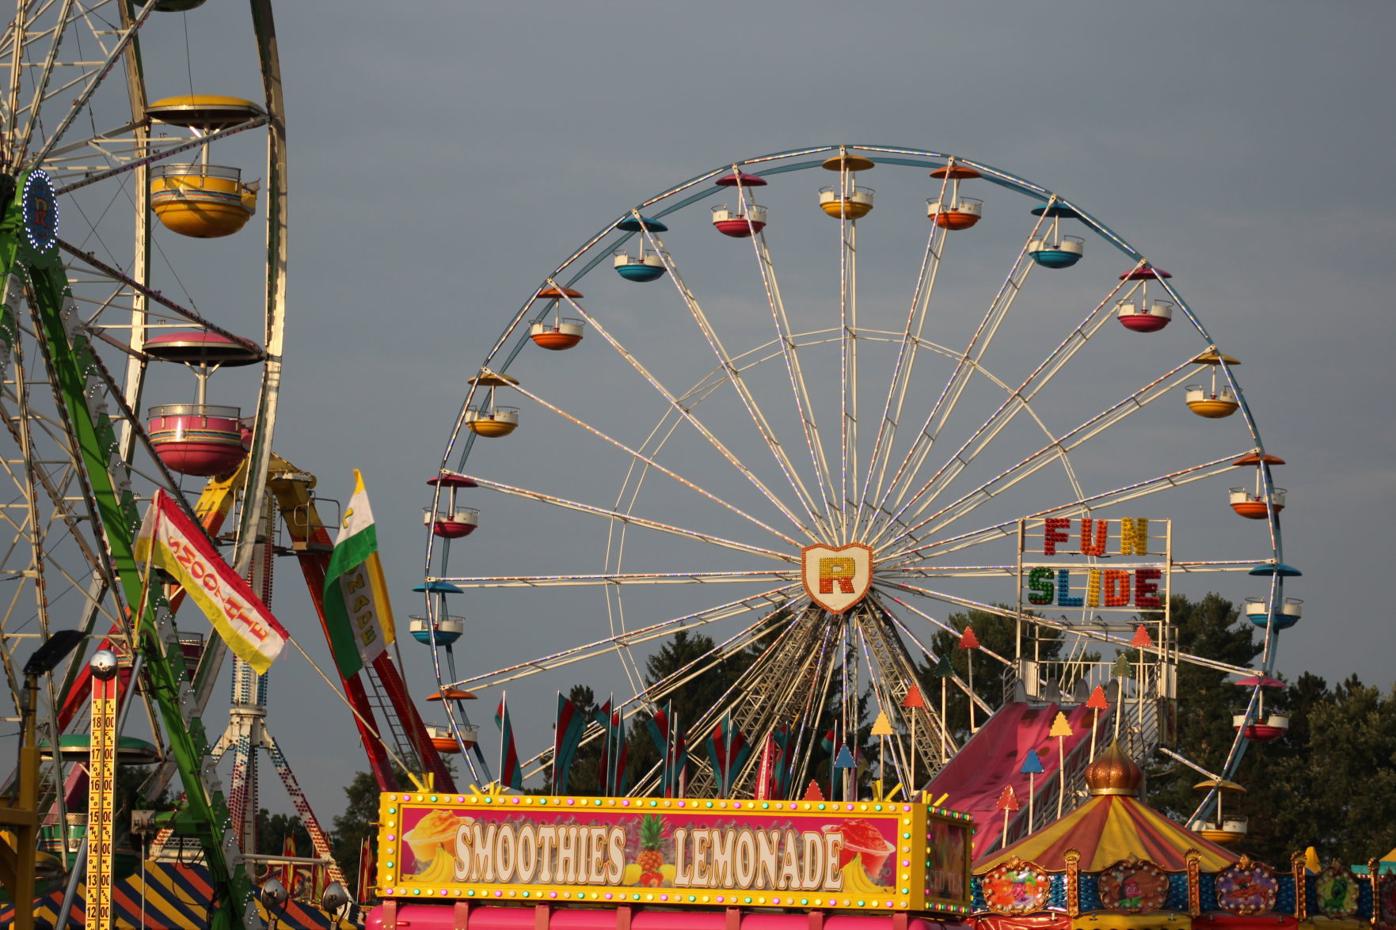 The State Fair of West Virginia's 94th year will offer something for